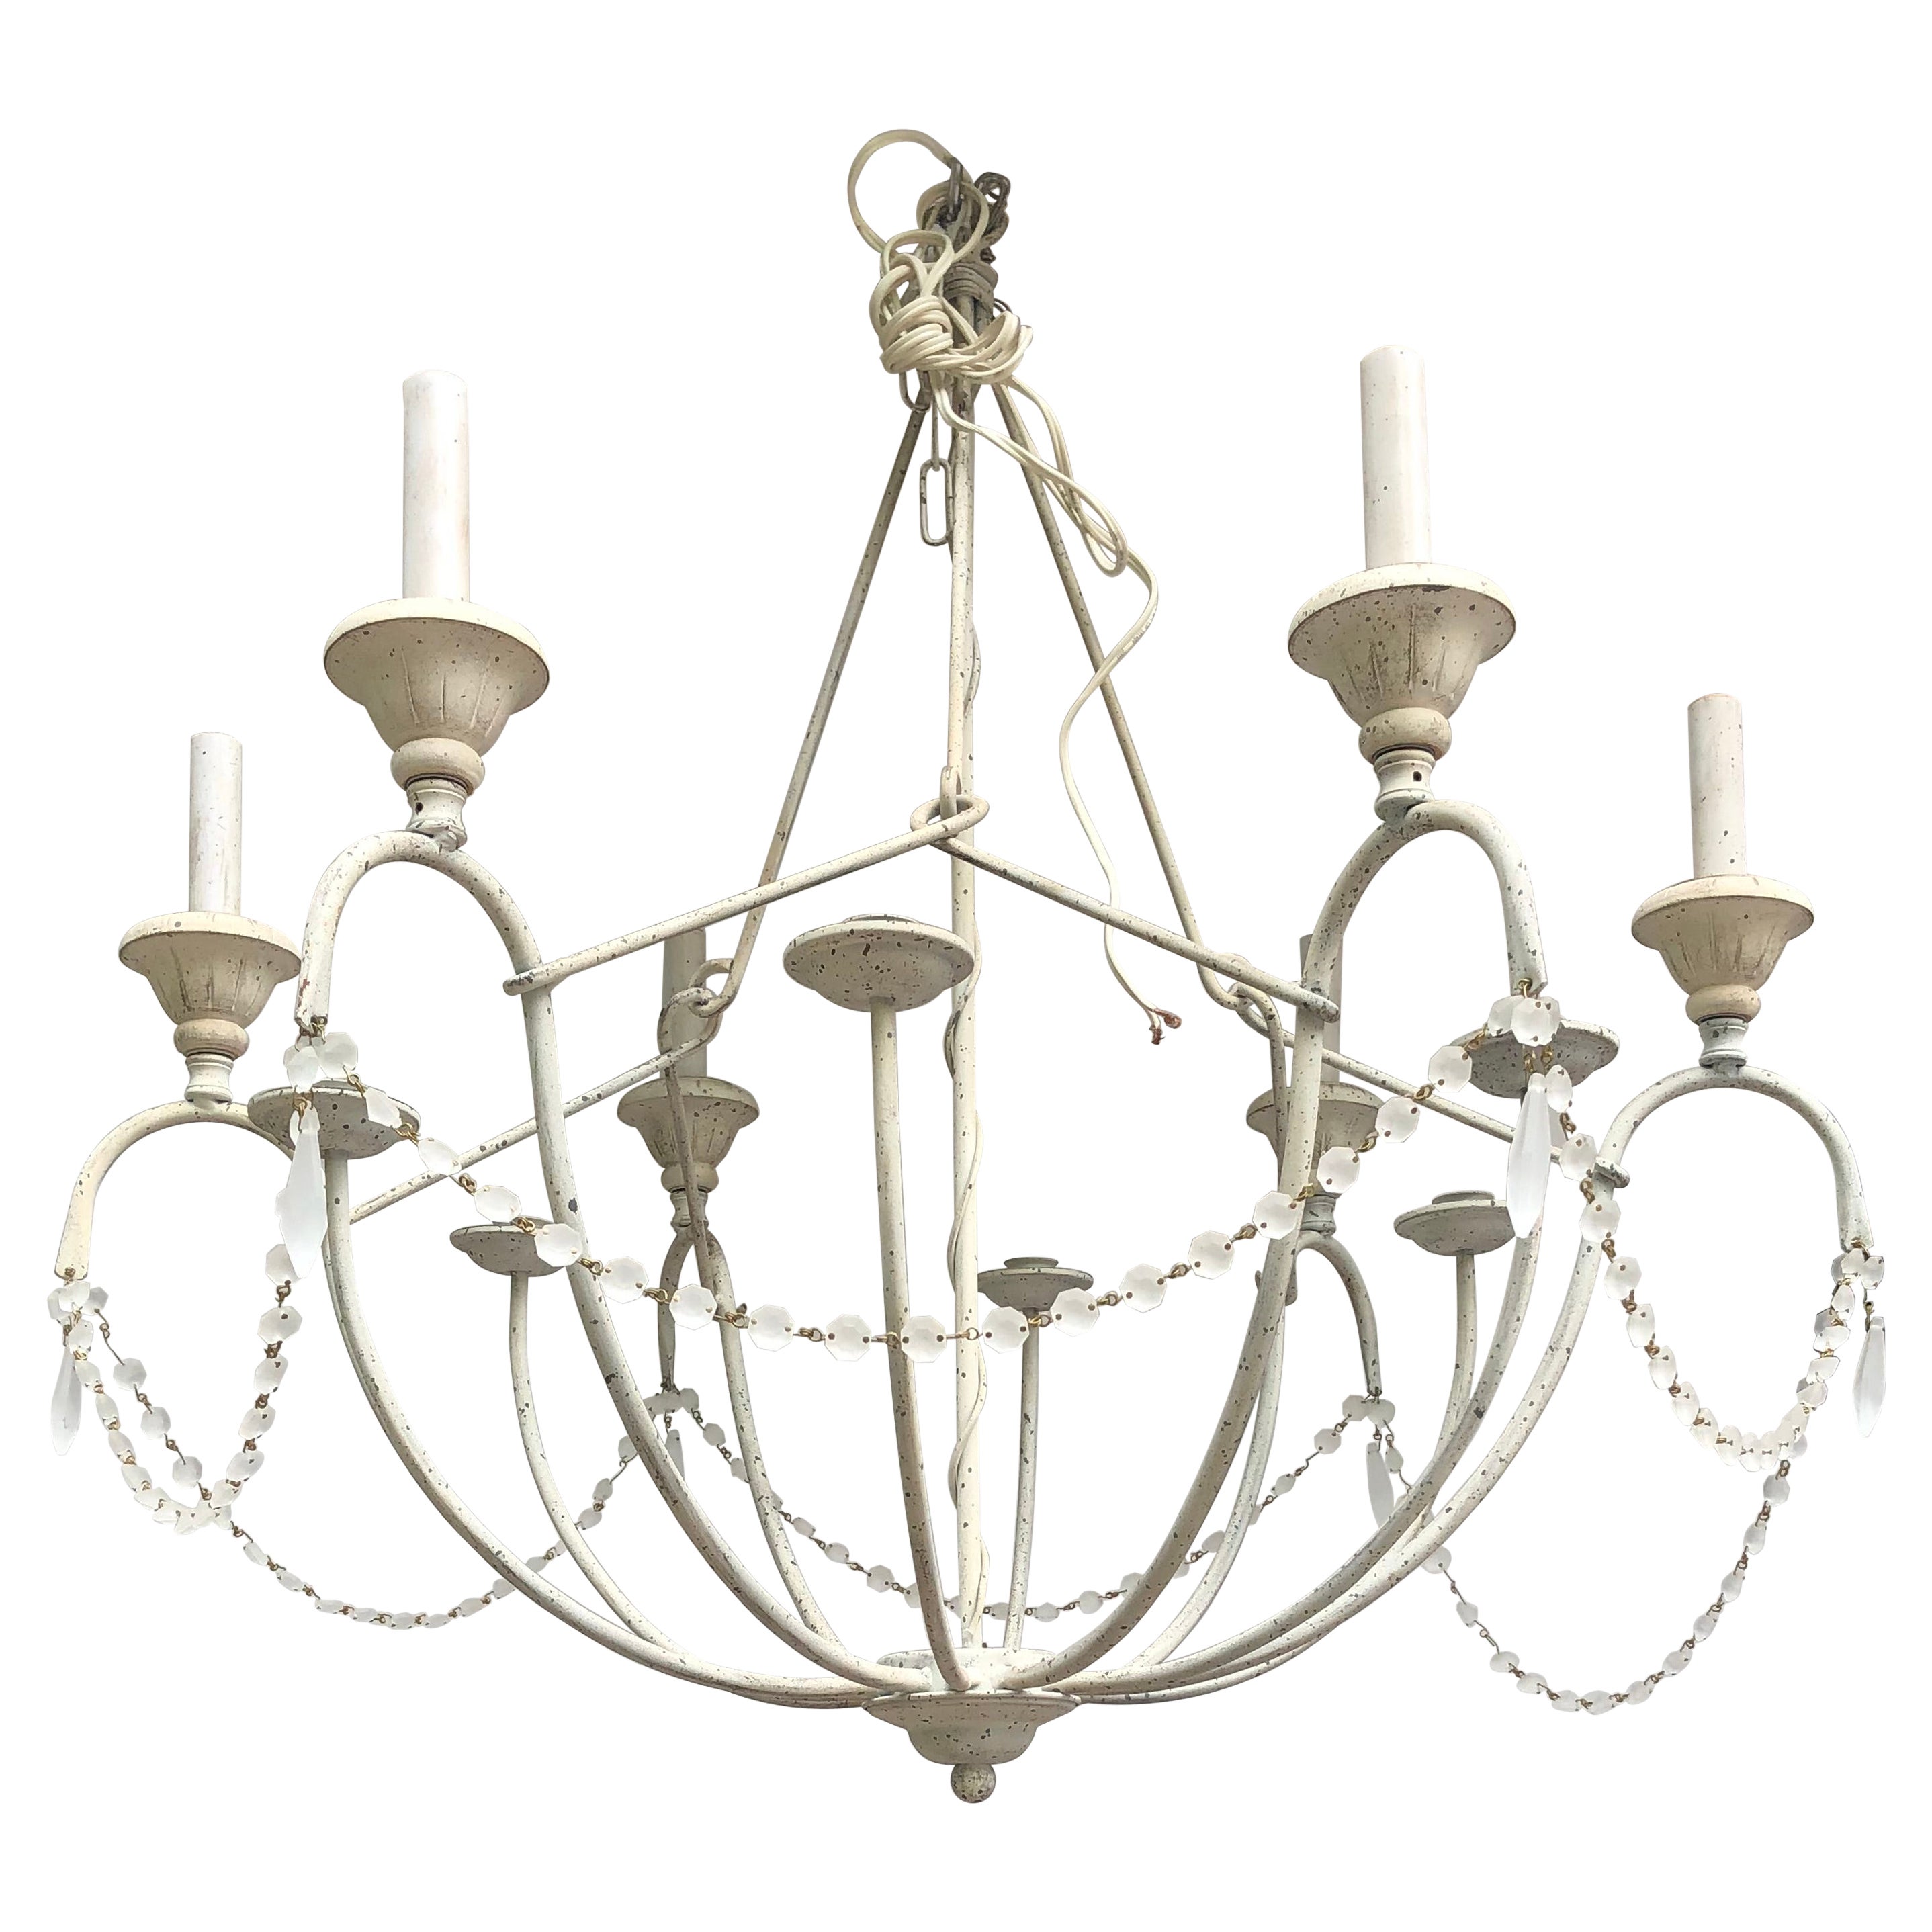 Pretty Whitewashed Iron French Country Chandelier